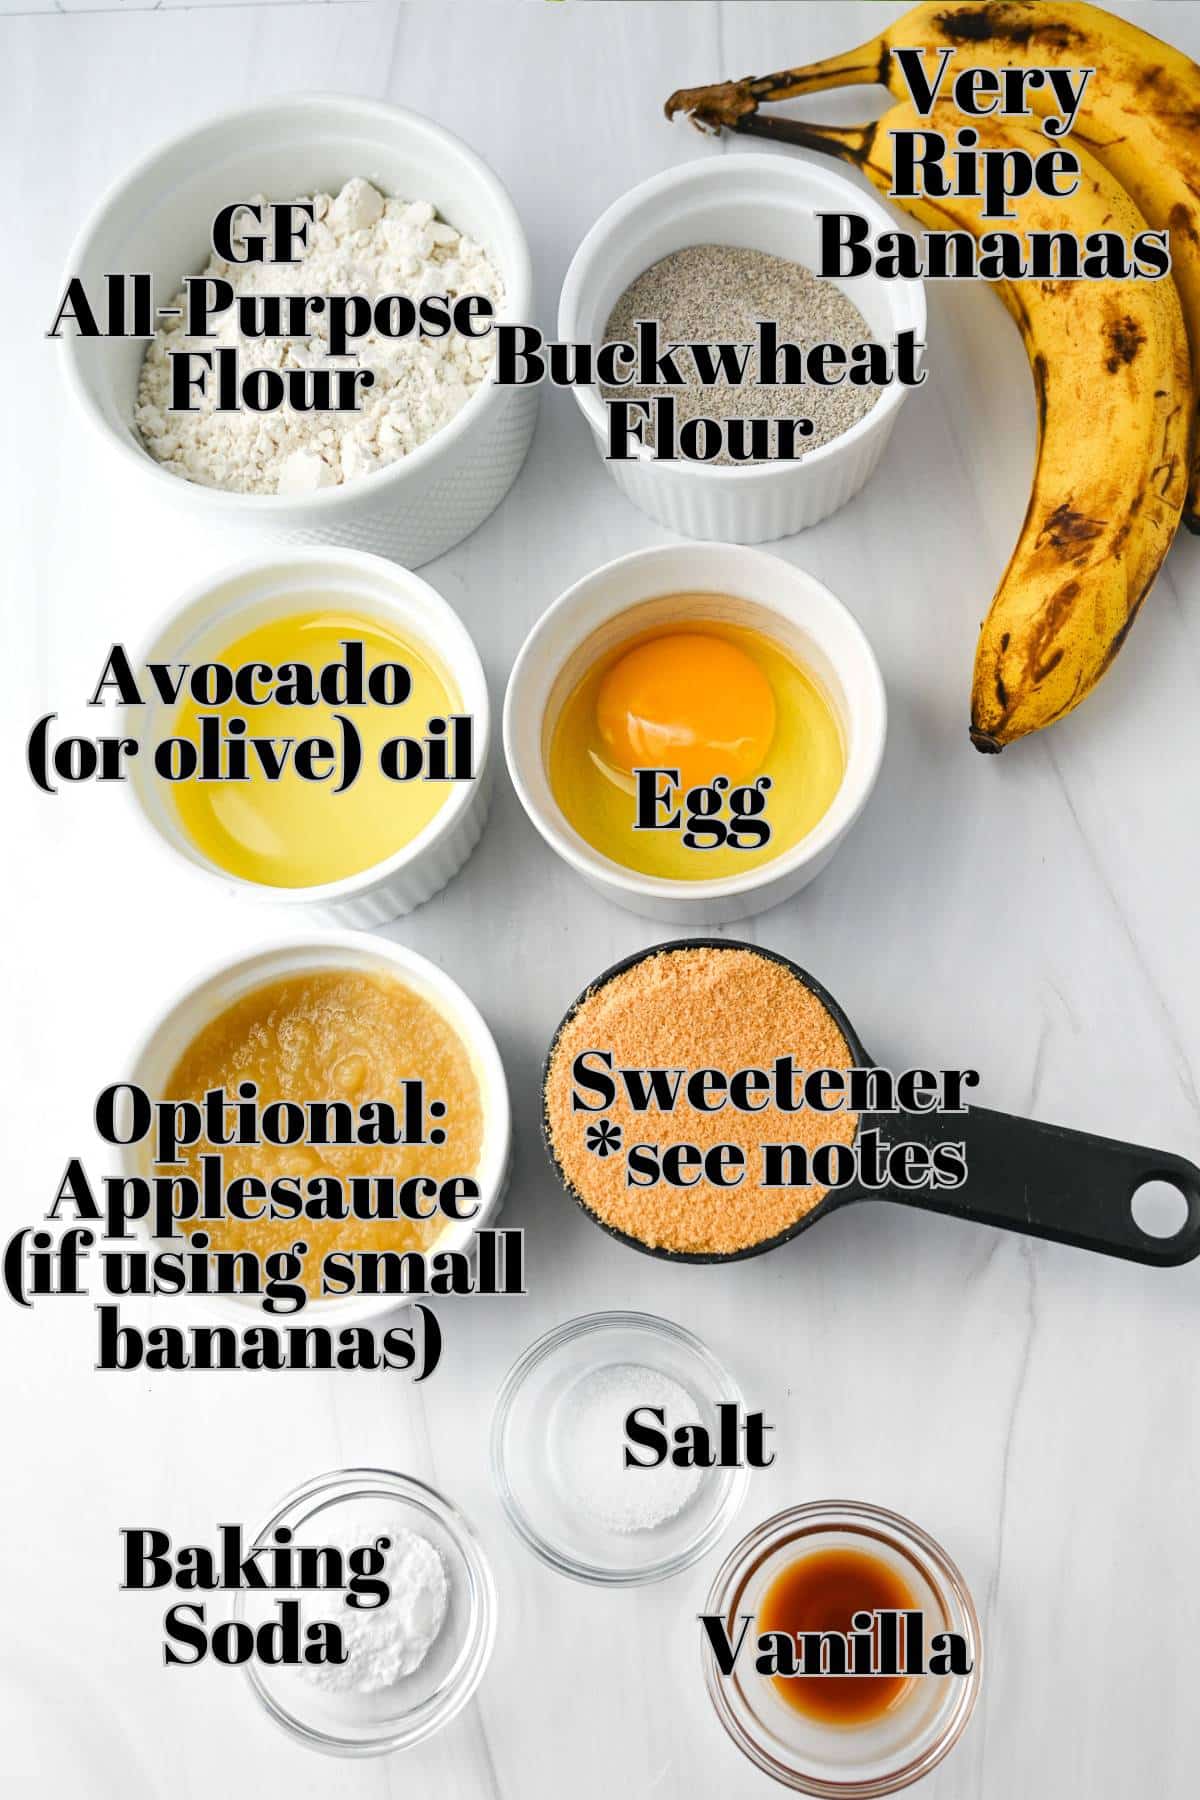 ingredients measured out on a counter for making gf banana muffins